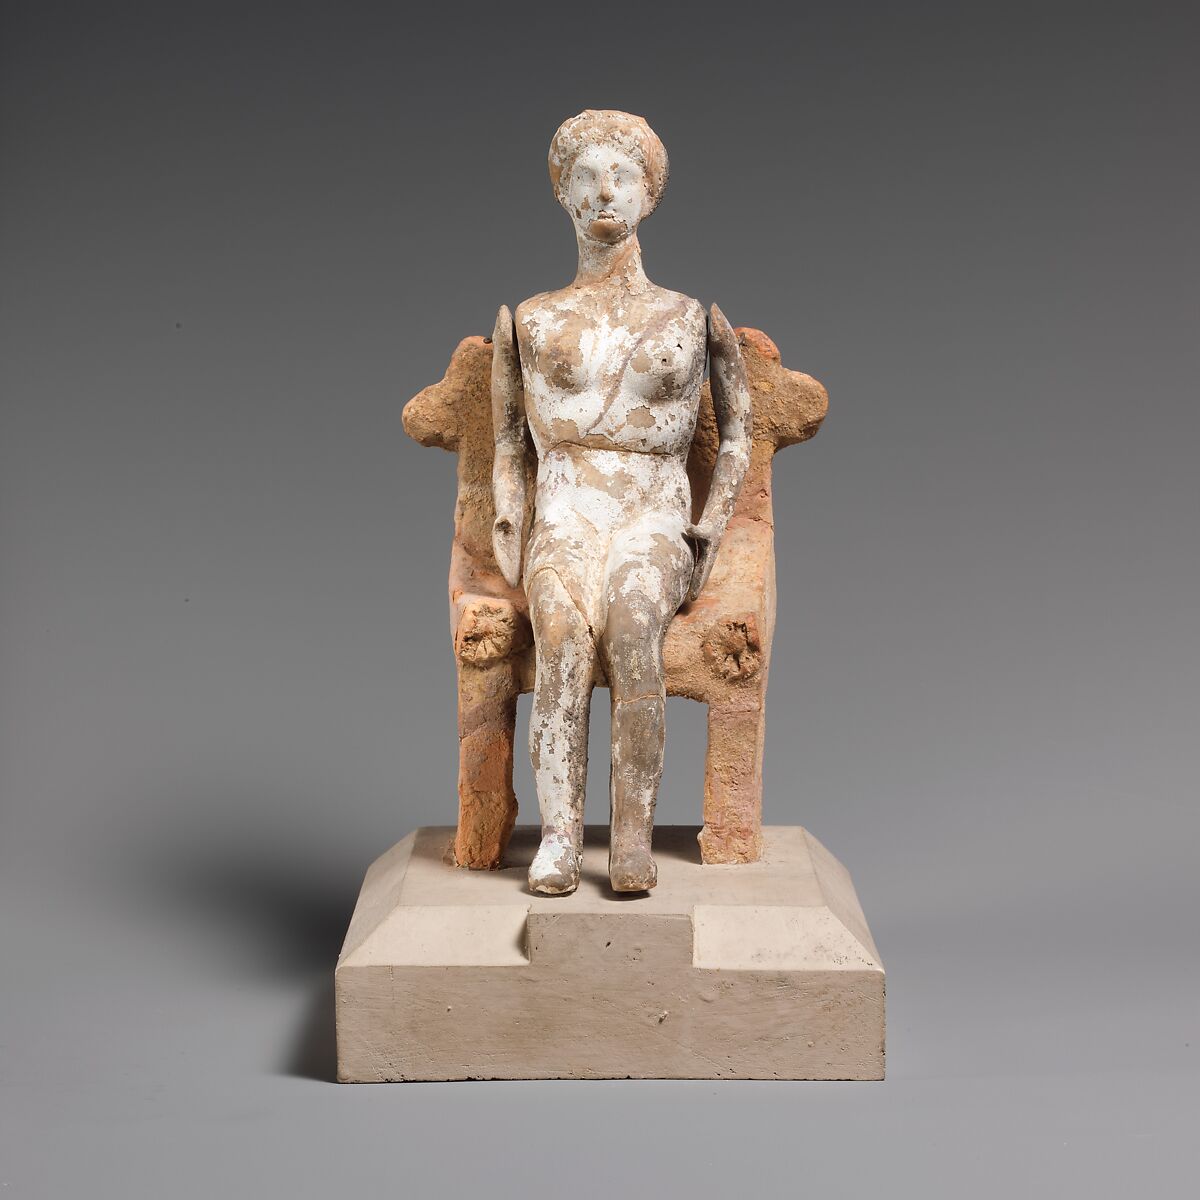 Terracotta doll with articulated arms seated on a chair, Terracotta, Greek, Attic 